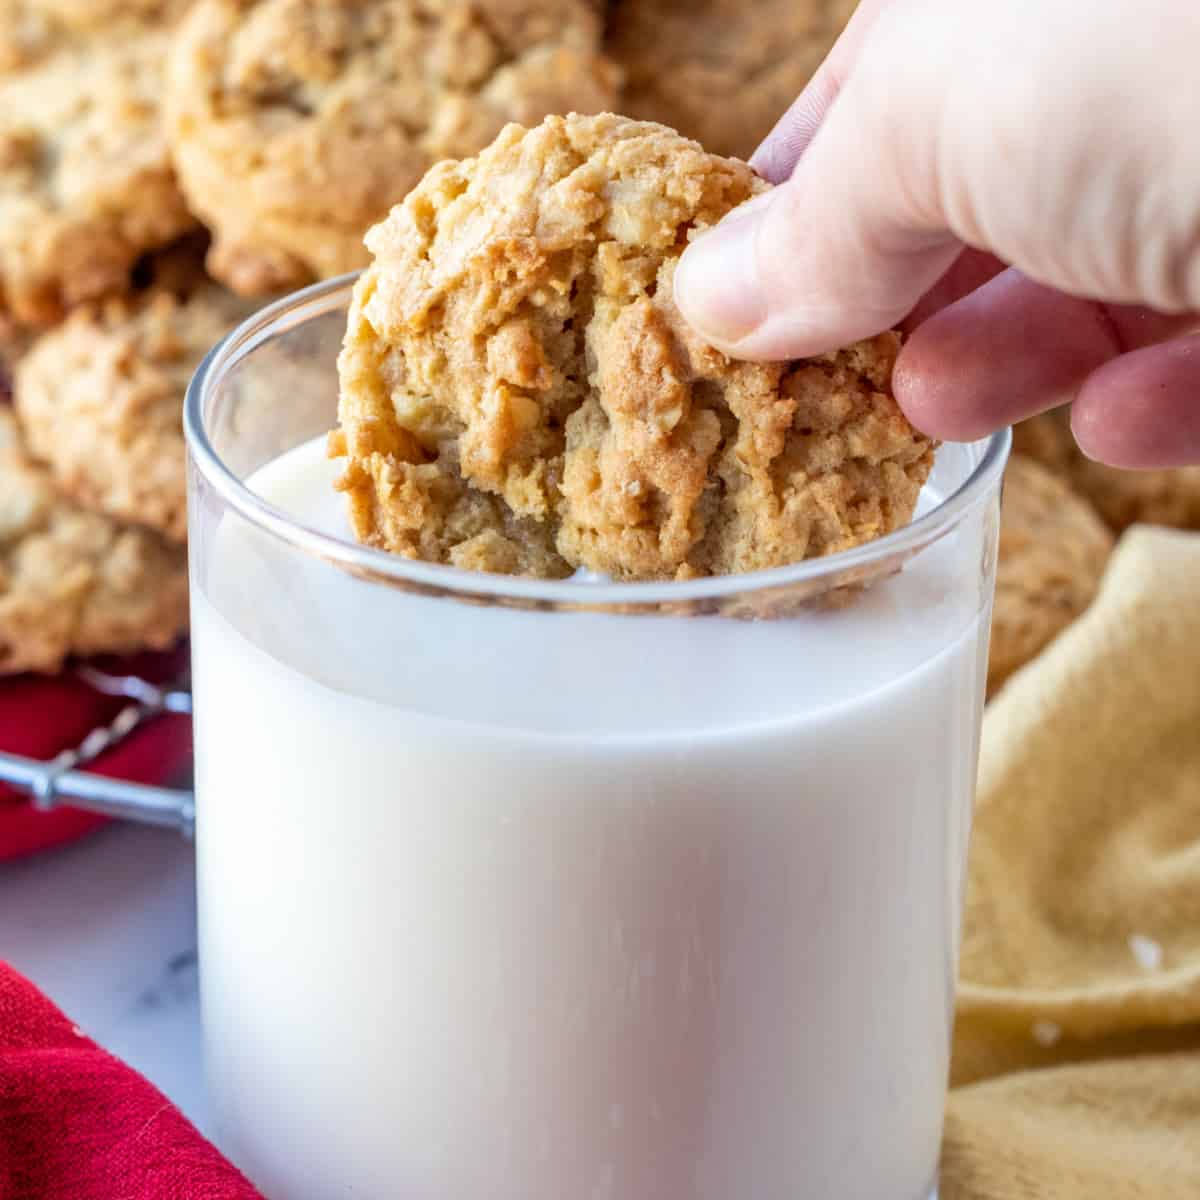 Dunking a Better Than Dad's Copycat Oatmeal Cookie in milk